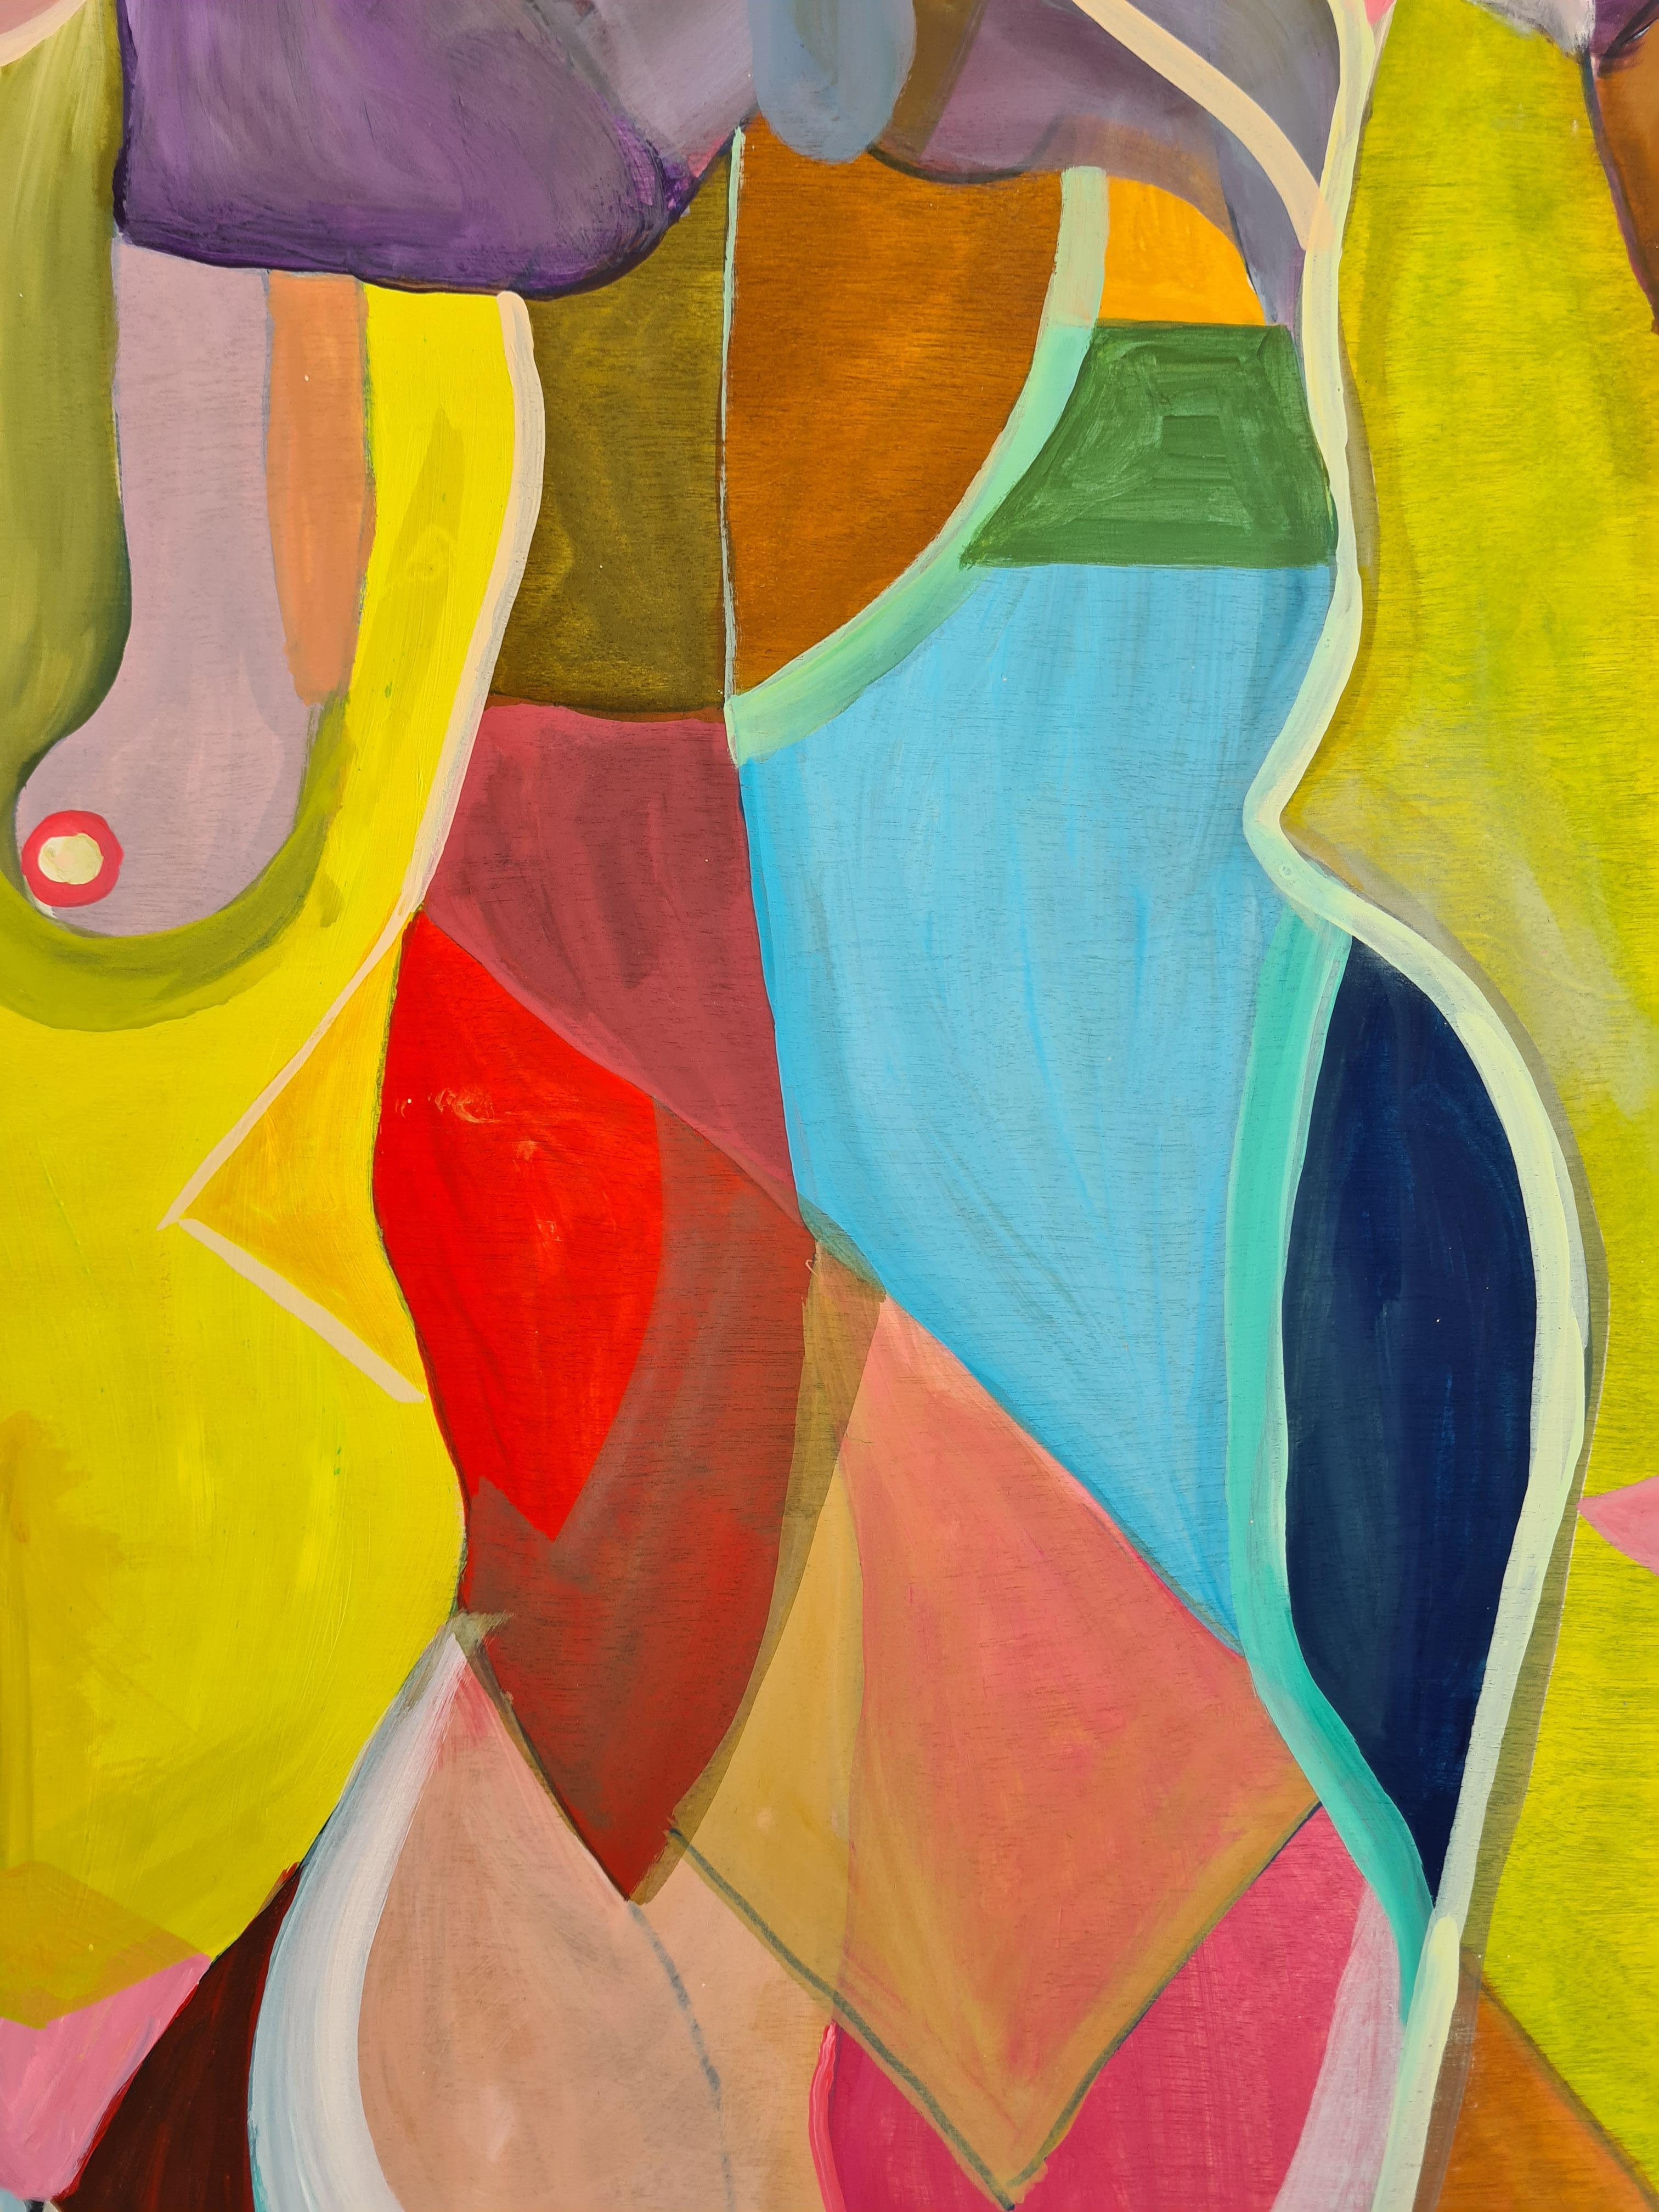 Dancing by K. Hormel - Nude Contemporary abstract colorful painting For Sale 10